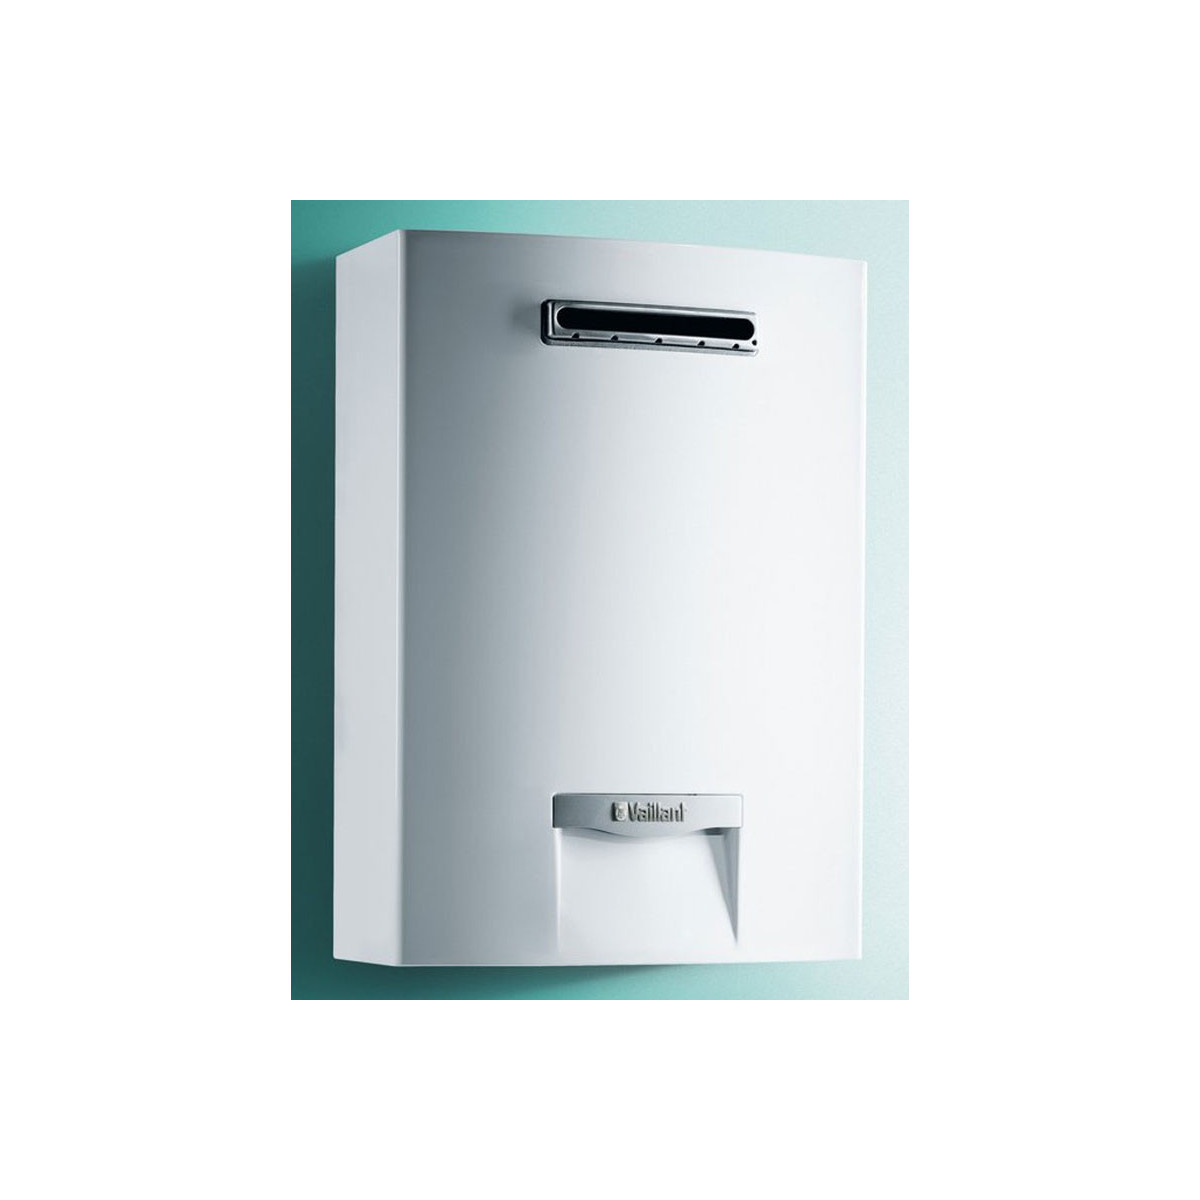 Scaldabagno Vaillant Outsidemag 178/1-5 camera stagna 17 LT Low Nox Metano A